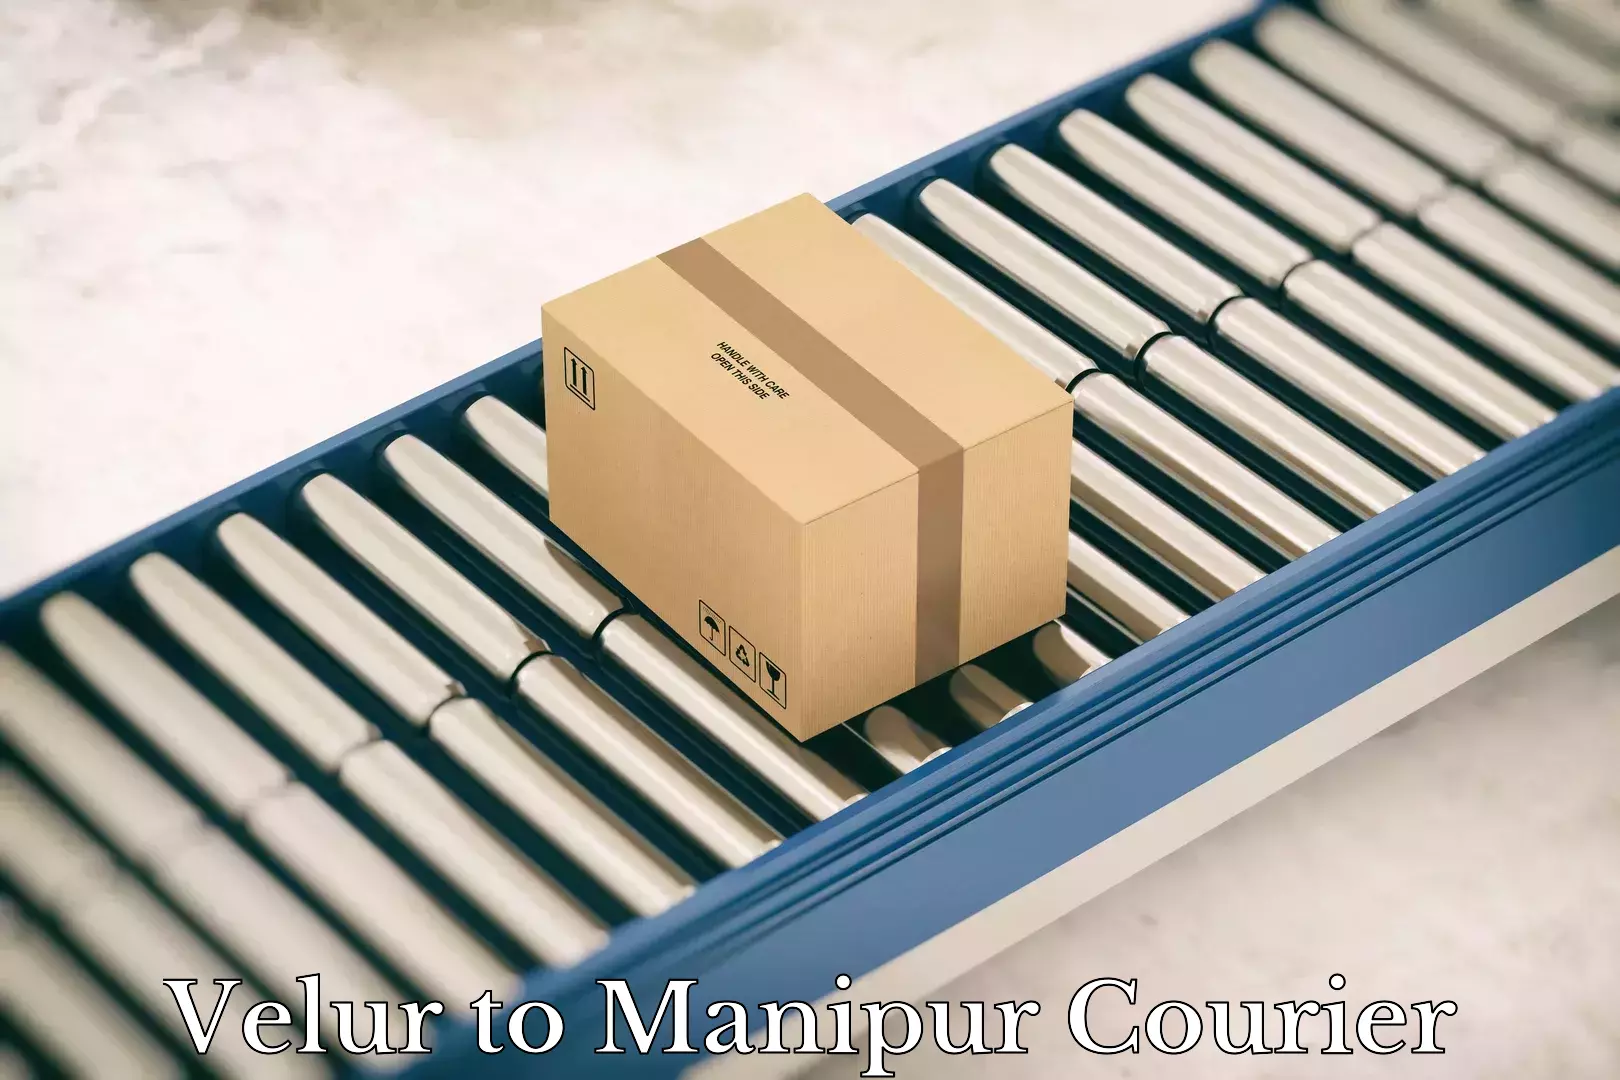 Seamless shipping service Velur to Manipur